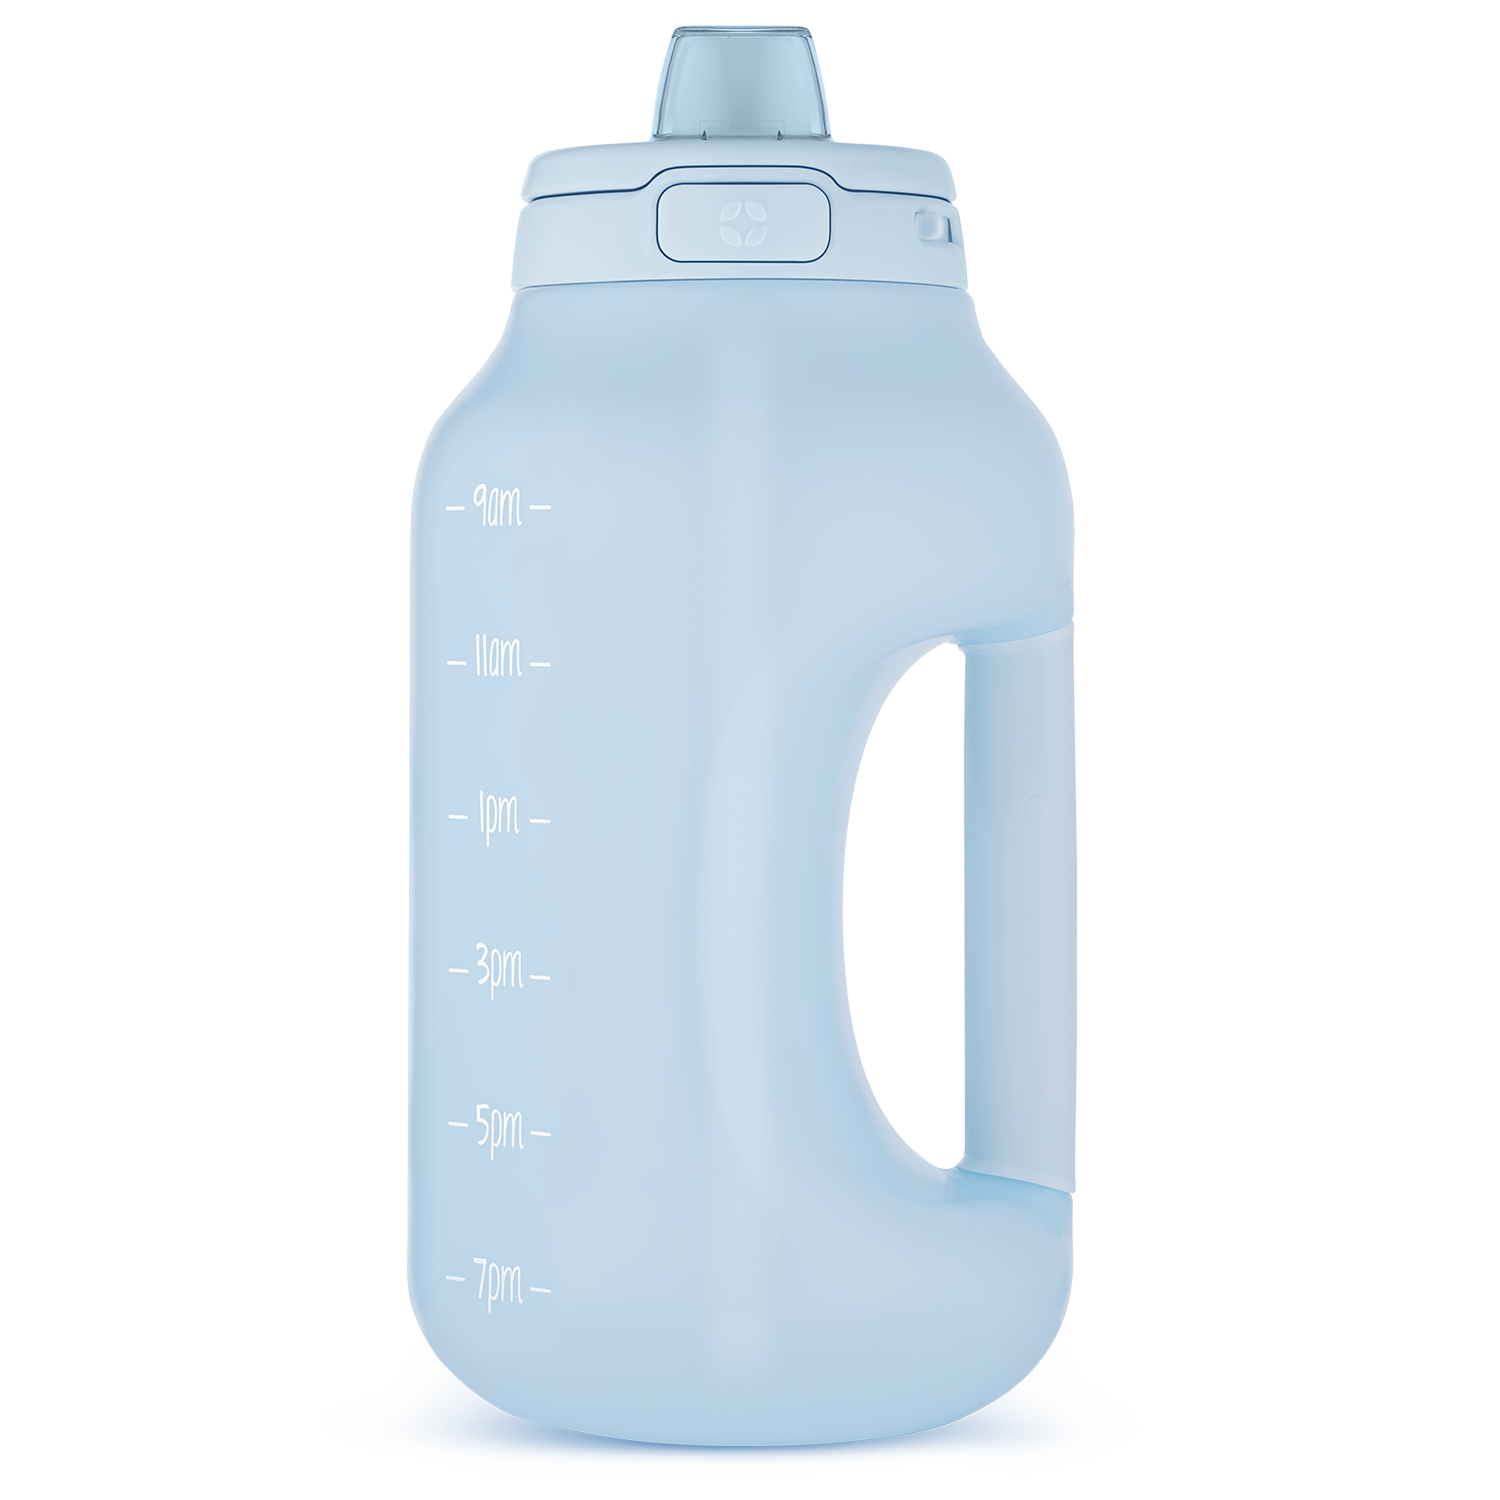 Choice 128 oz. Polypropylene Beverage Pitcher with Blue Lid and Handle